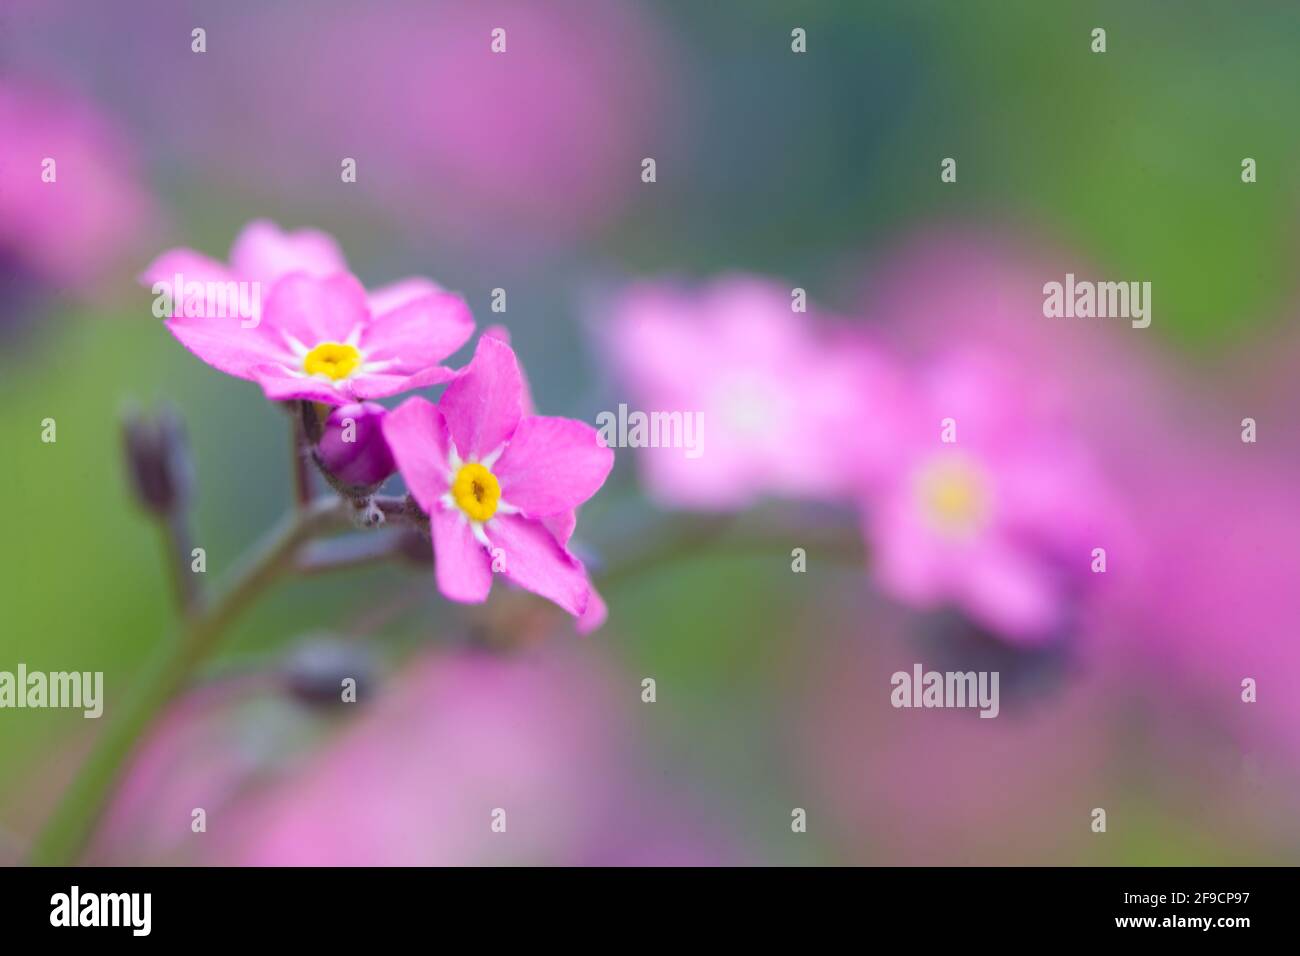 Little pink spring flowers, veronica speedwell. Springtime garden with beautiful pink flowers. Stock Photo